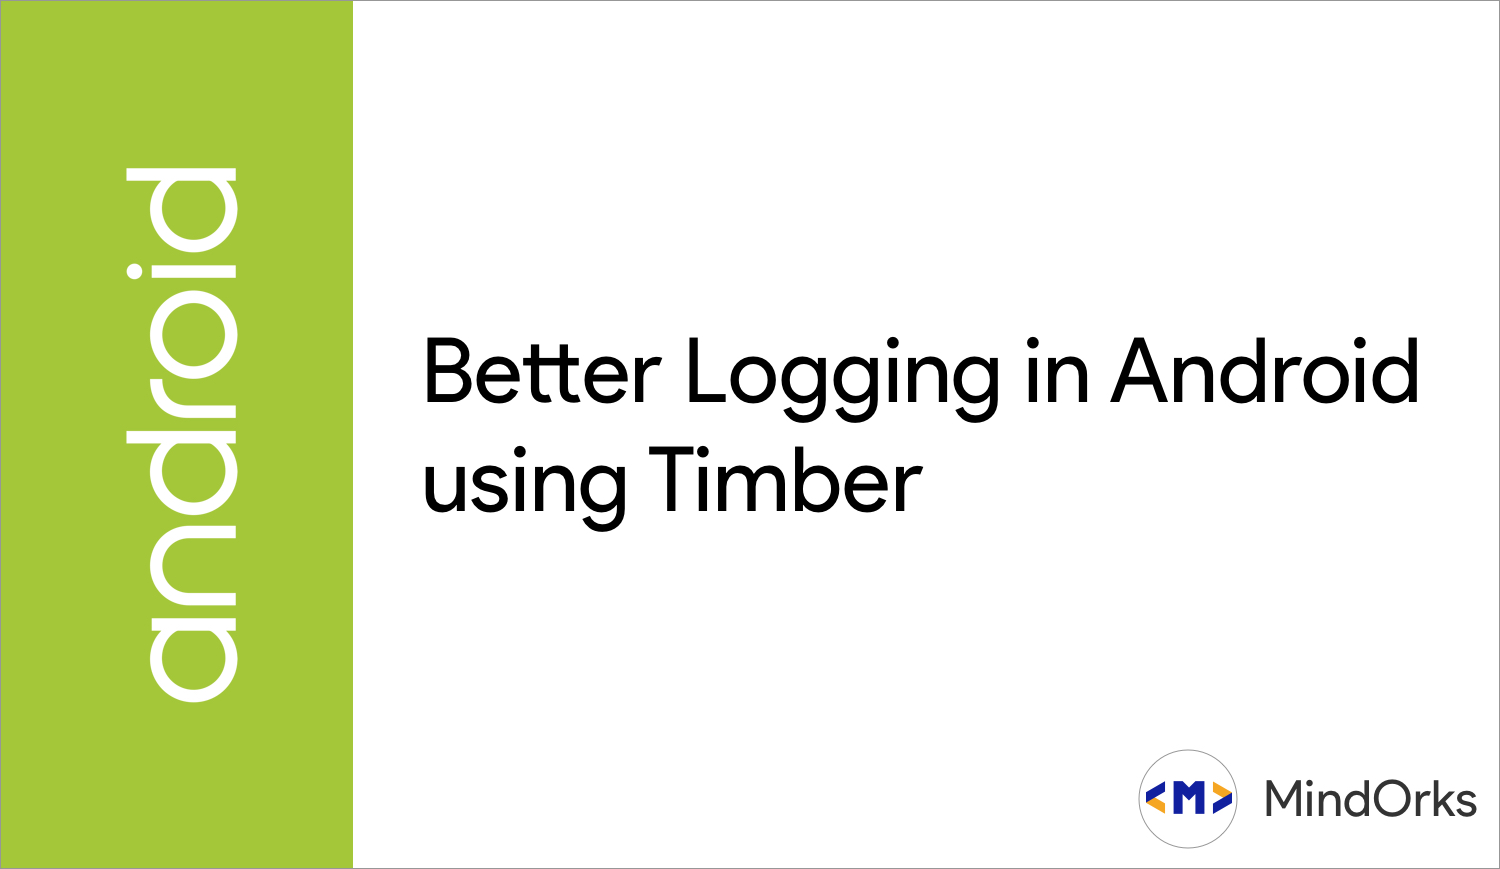 Better Logging in Android Using Timber